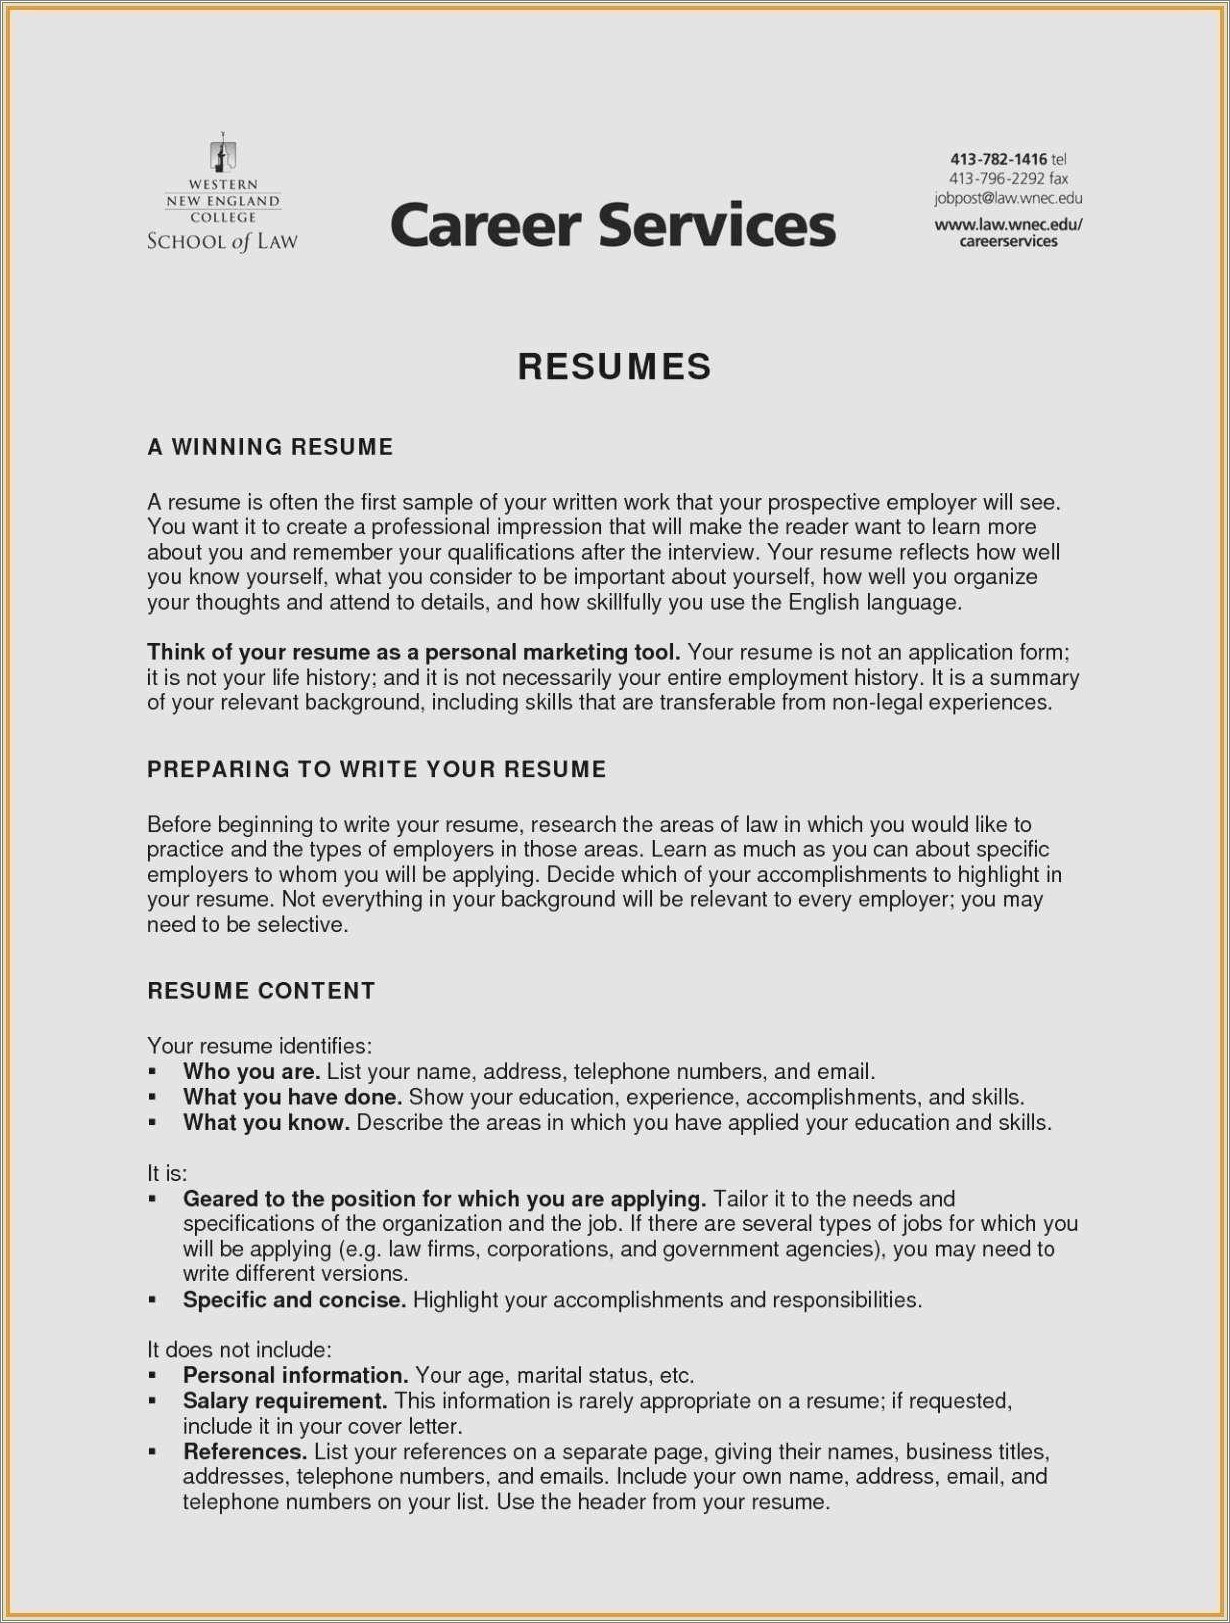 Write Your Own Resume Be Job Specific